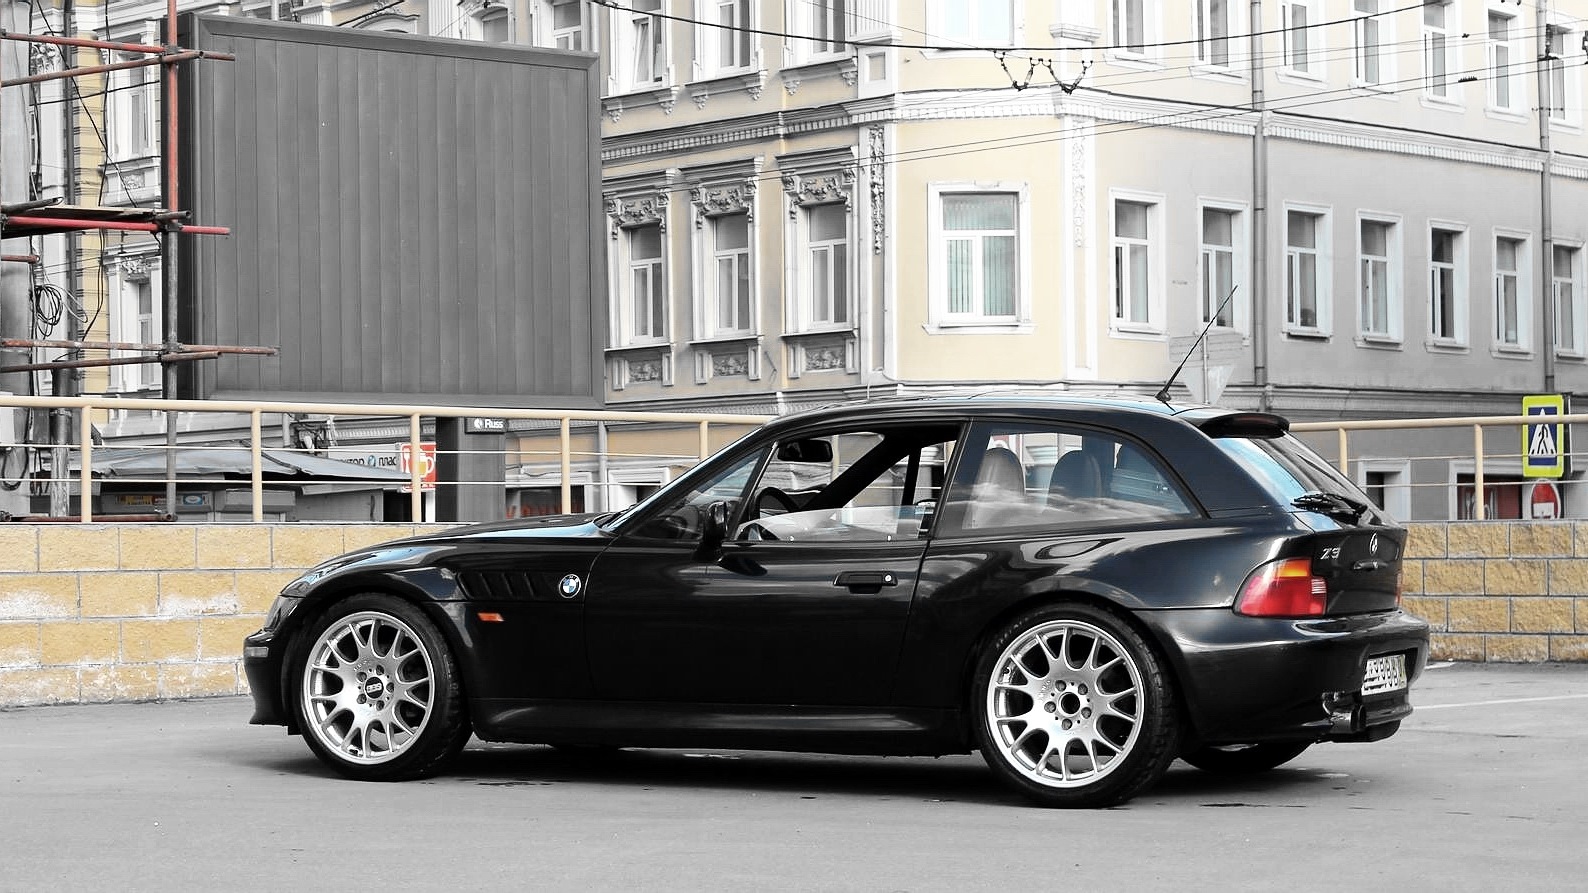 Z3 5. BMW z3 m Coupe. BMW z3 BBS. BMW z3 BBS Ch. BMW z3 BBS RC.